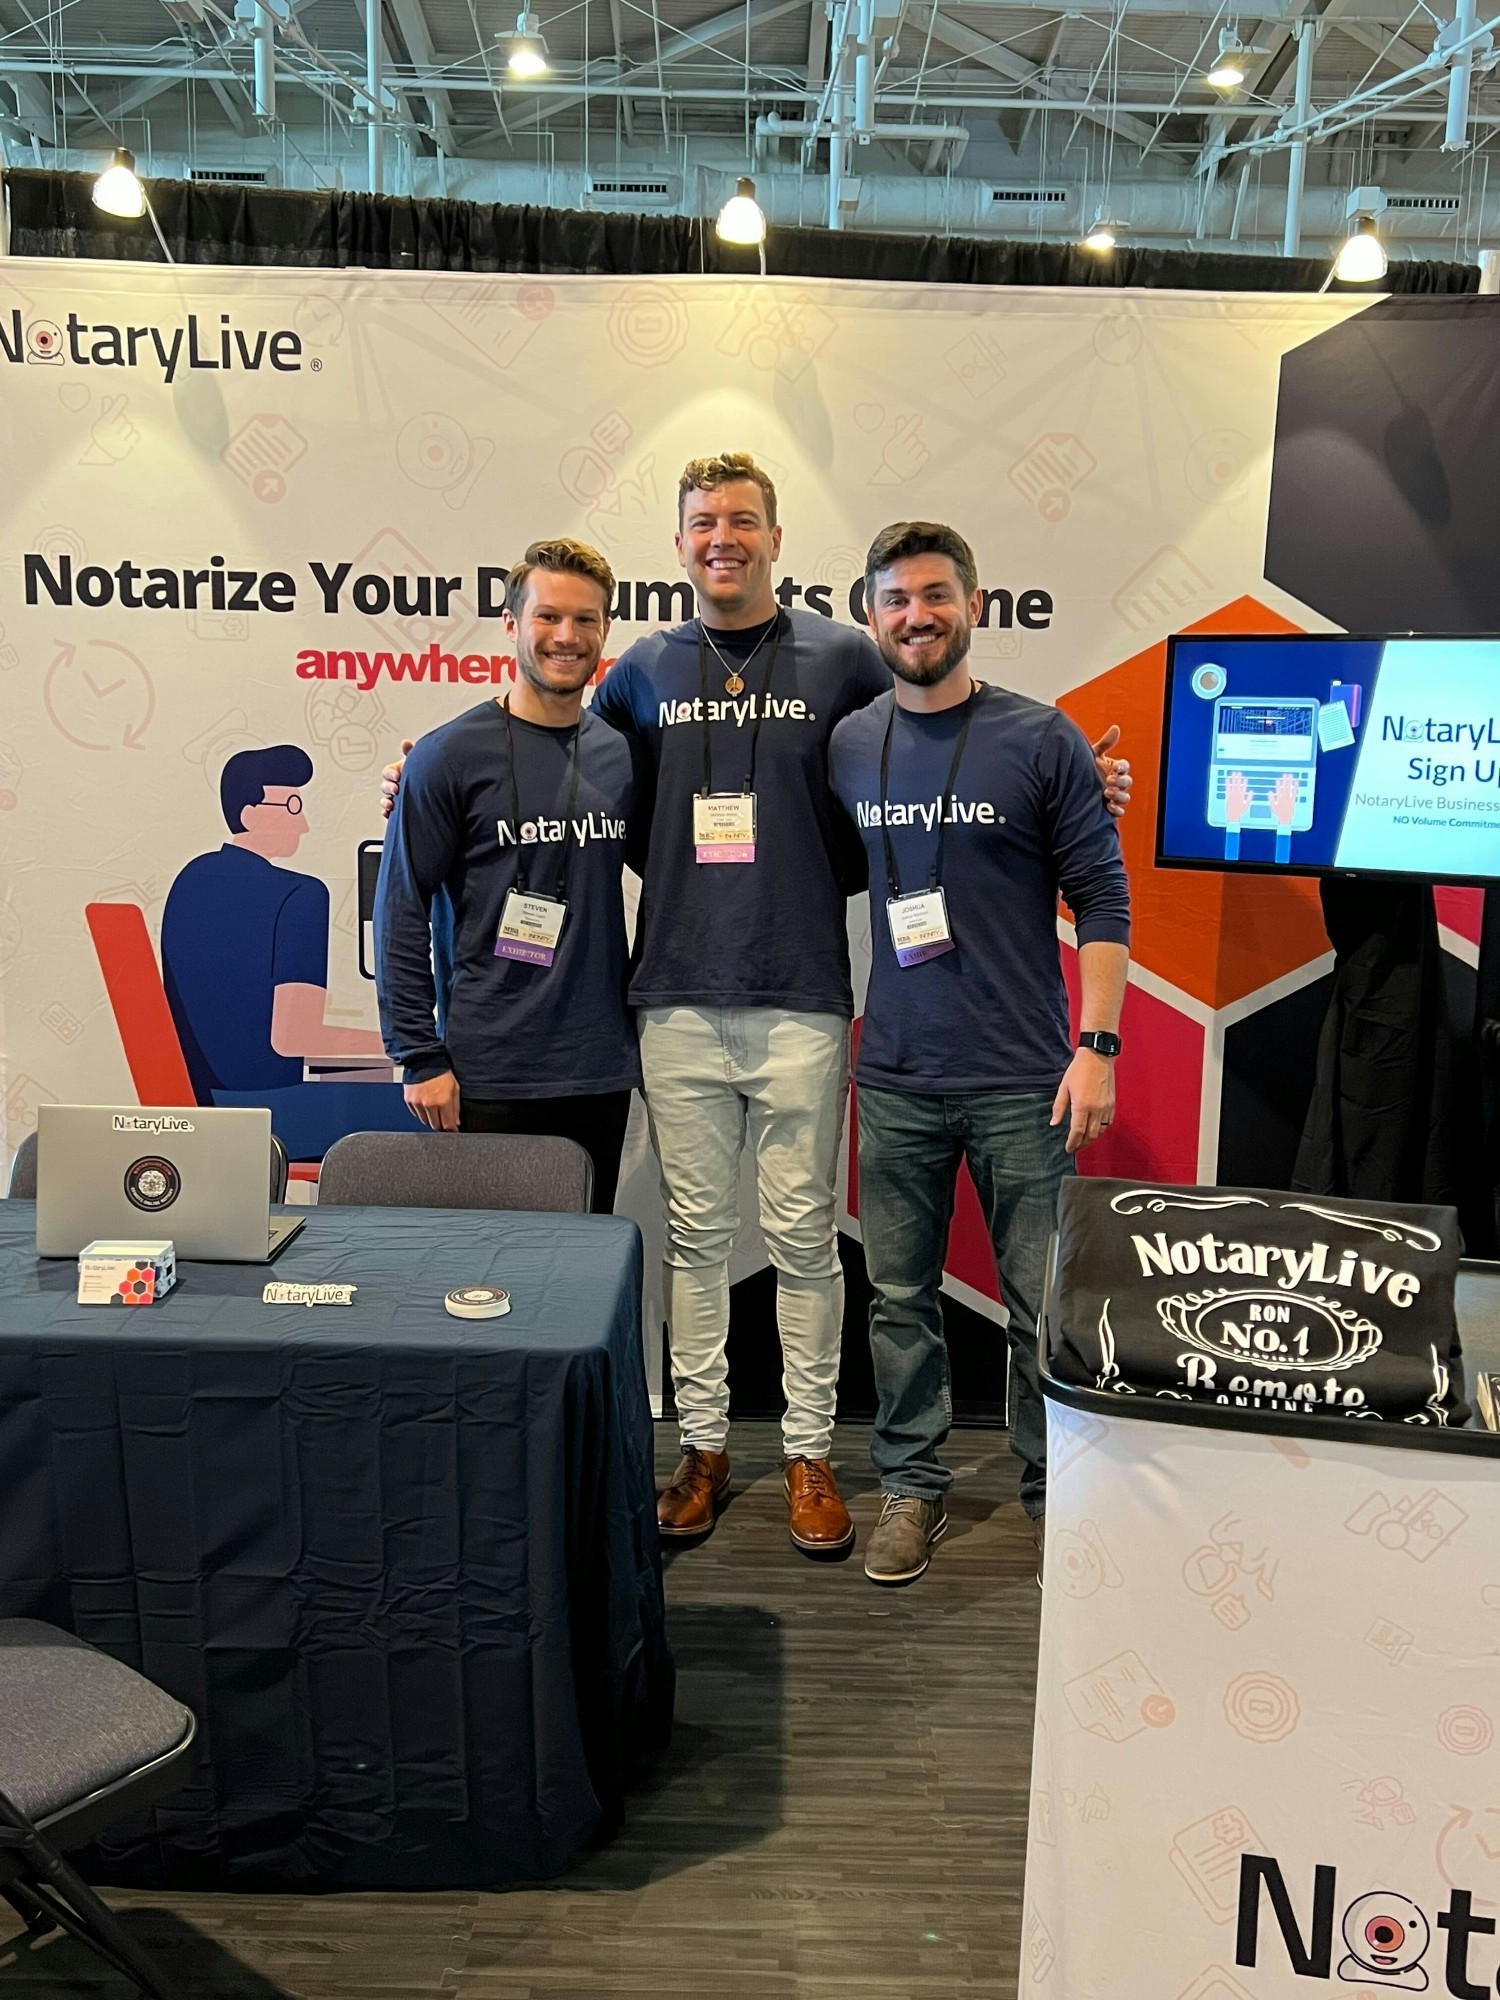 Showcasing NotaryLive at conferences around the country!